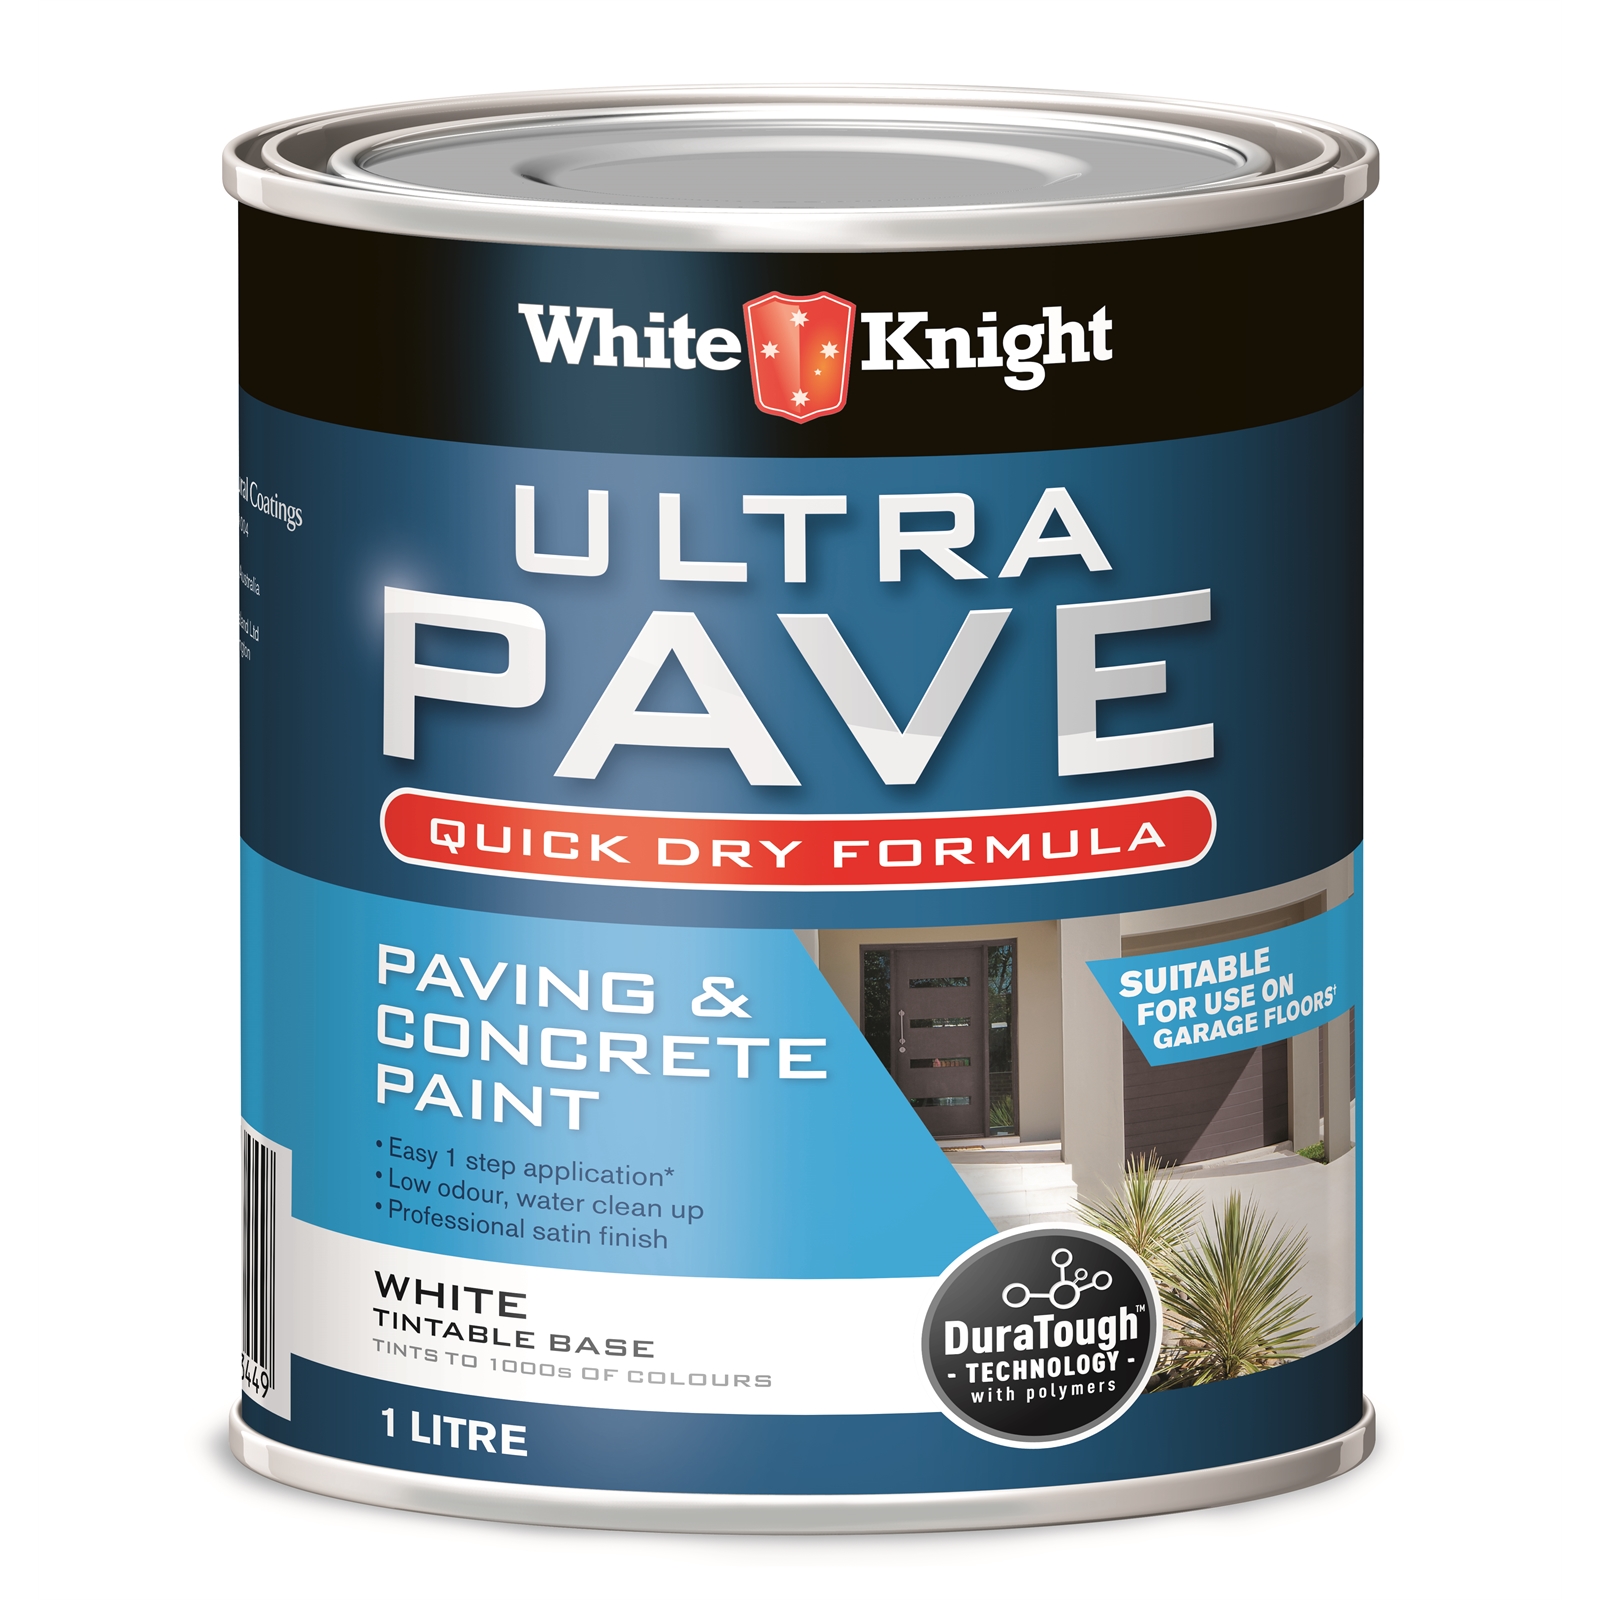 White Knight 1L White Ultra Pave Quick Dry Paint